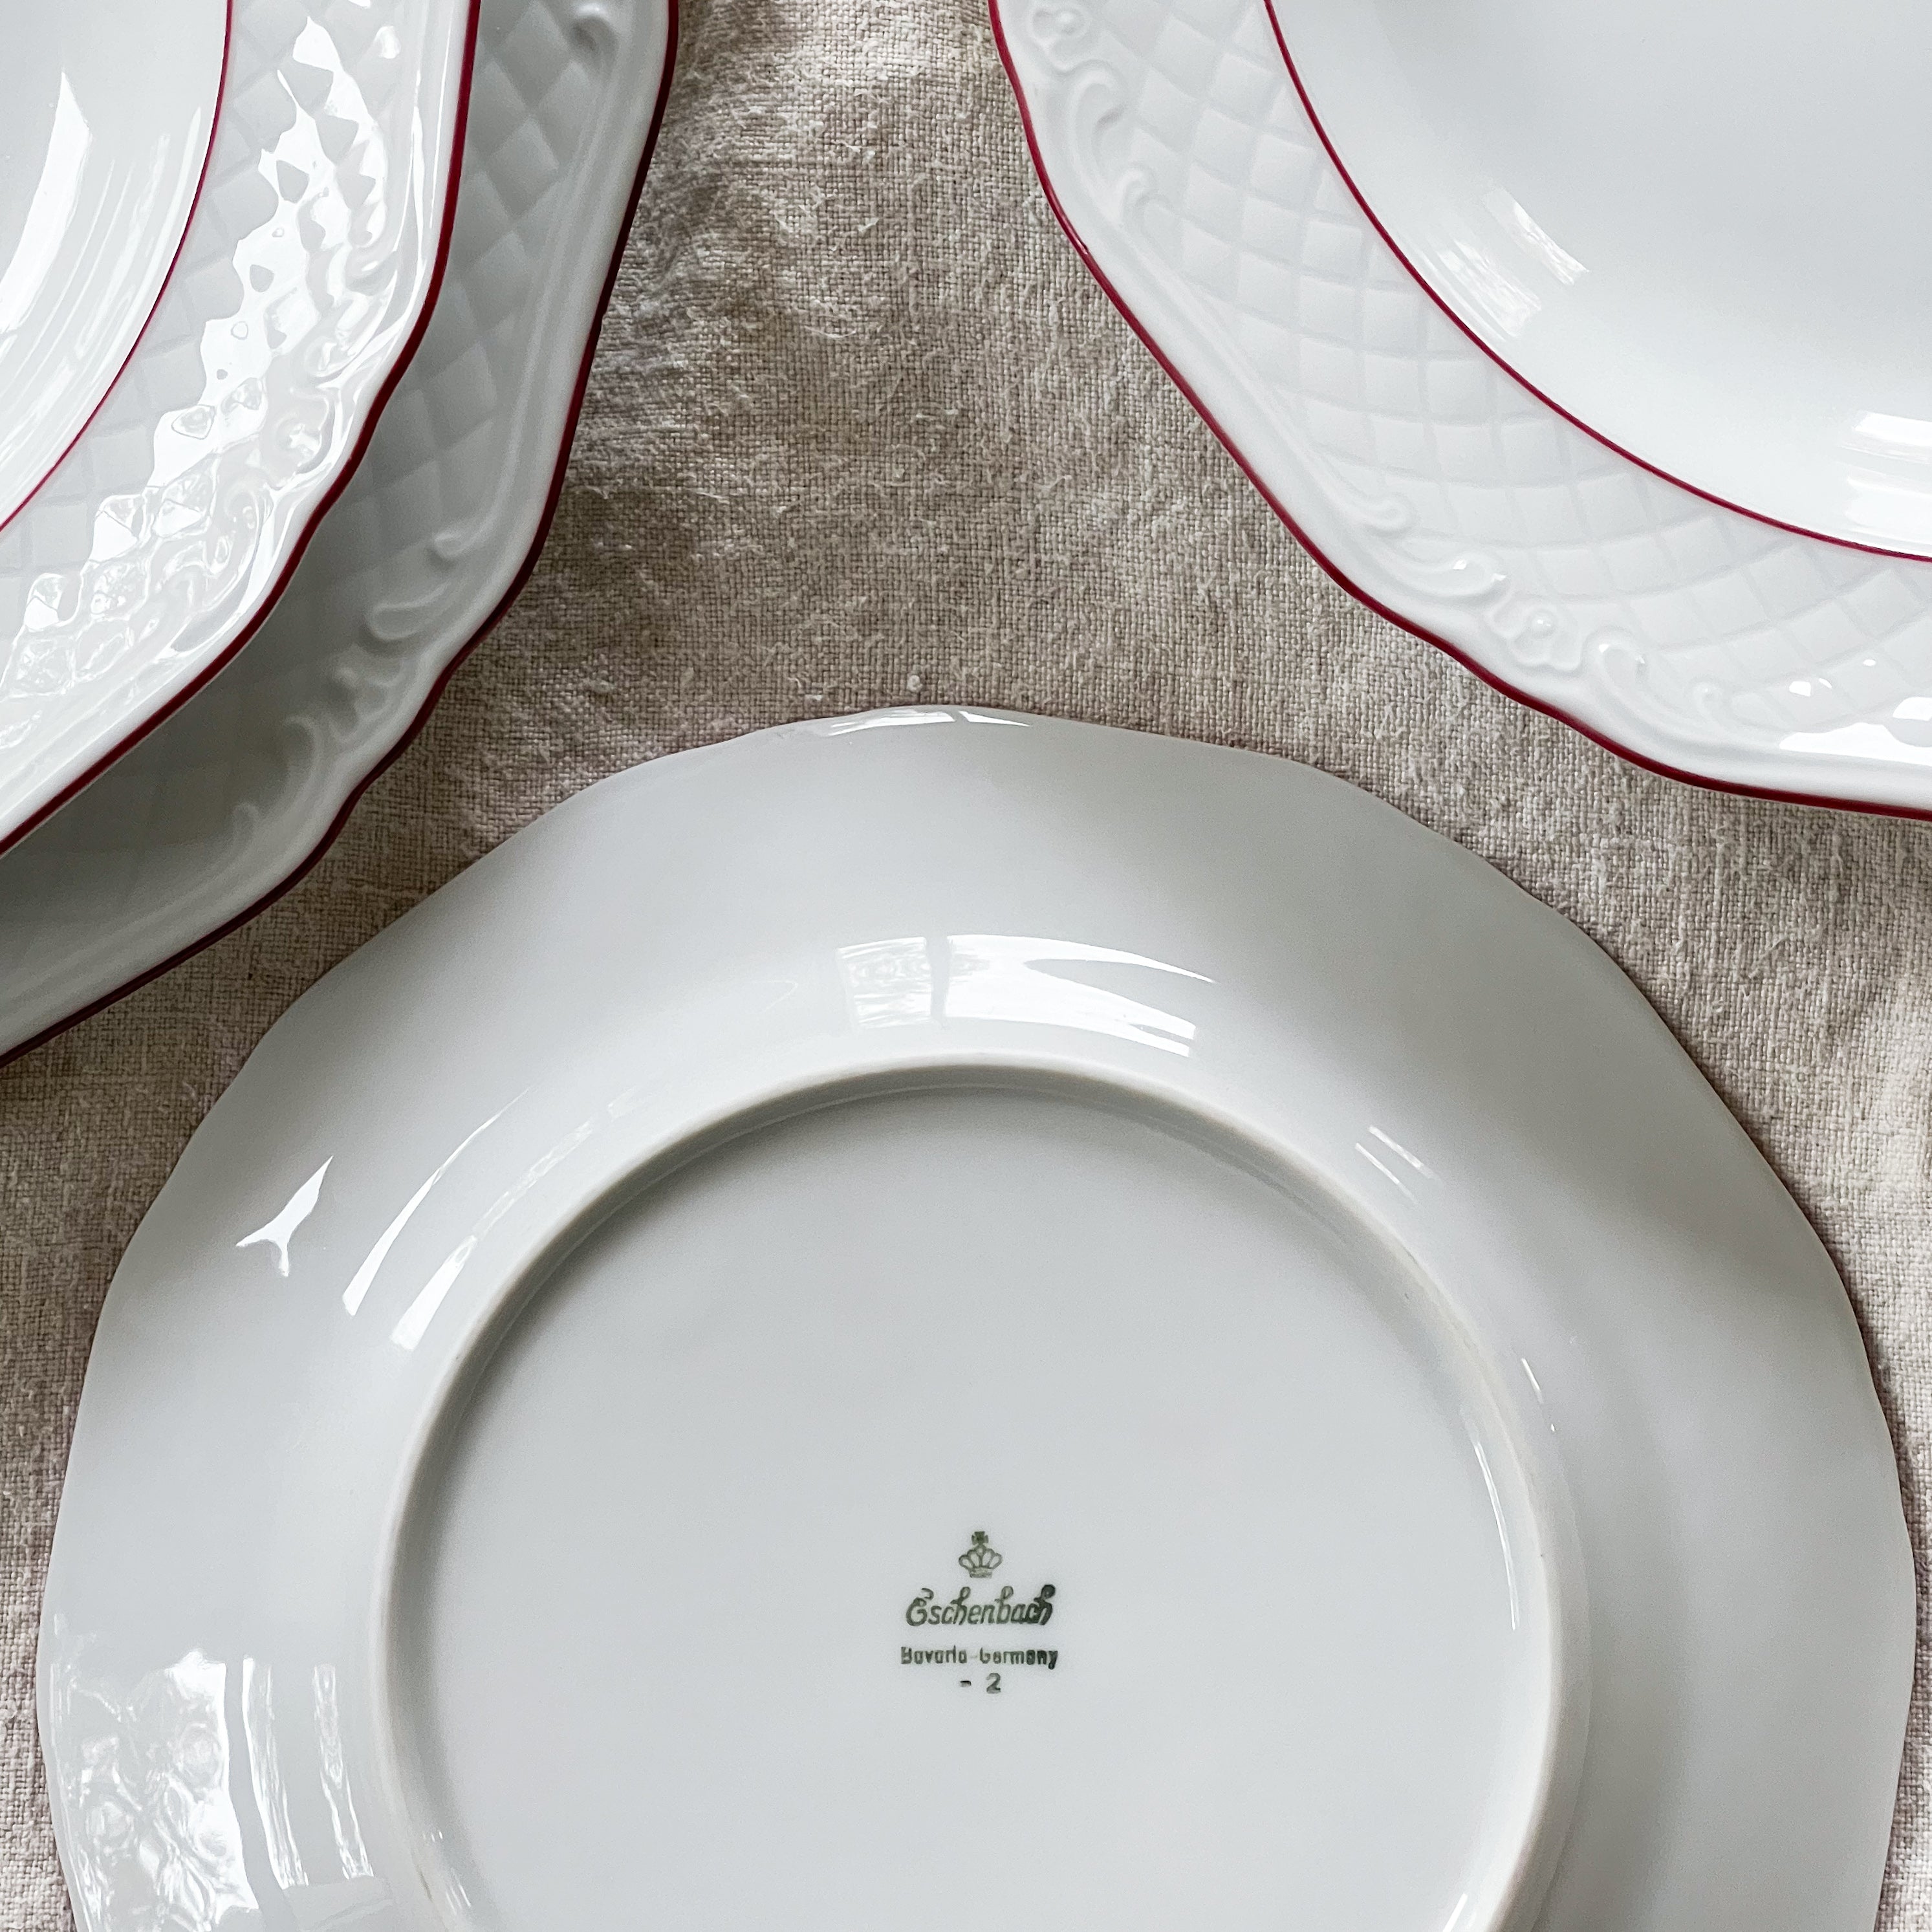 Vintage Red and White Plates